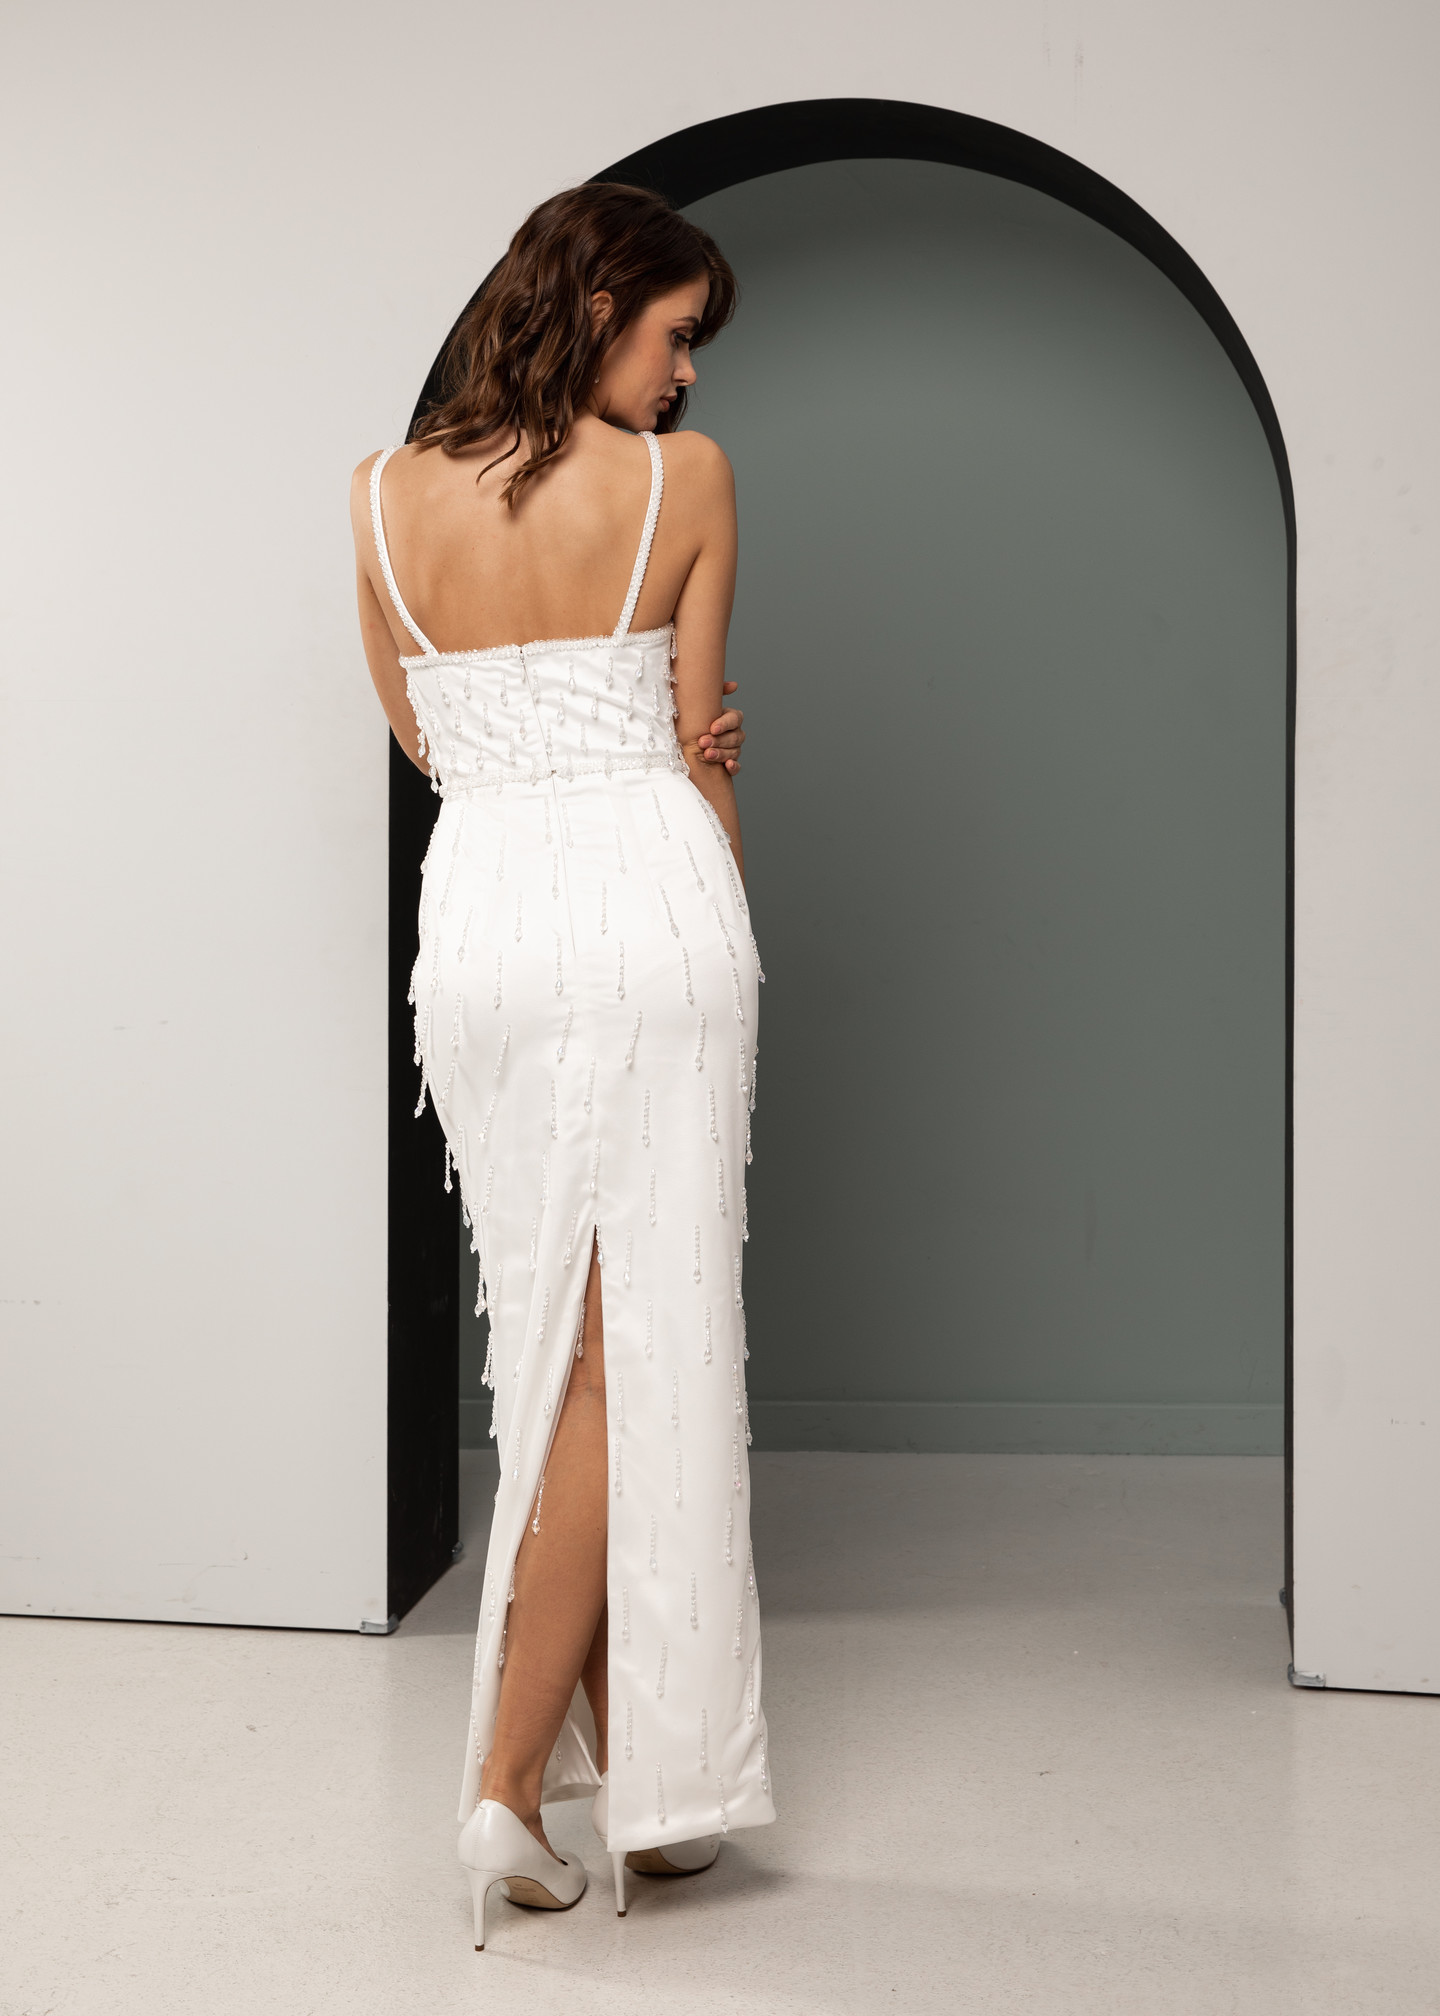 Francesca dress, 2021, couture, dress, bridal, off-white, embroidery, sheath silhouette